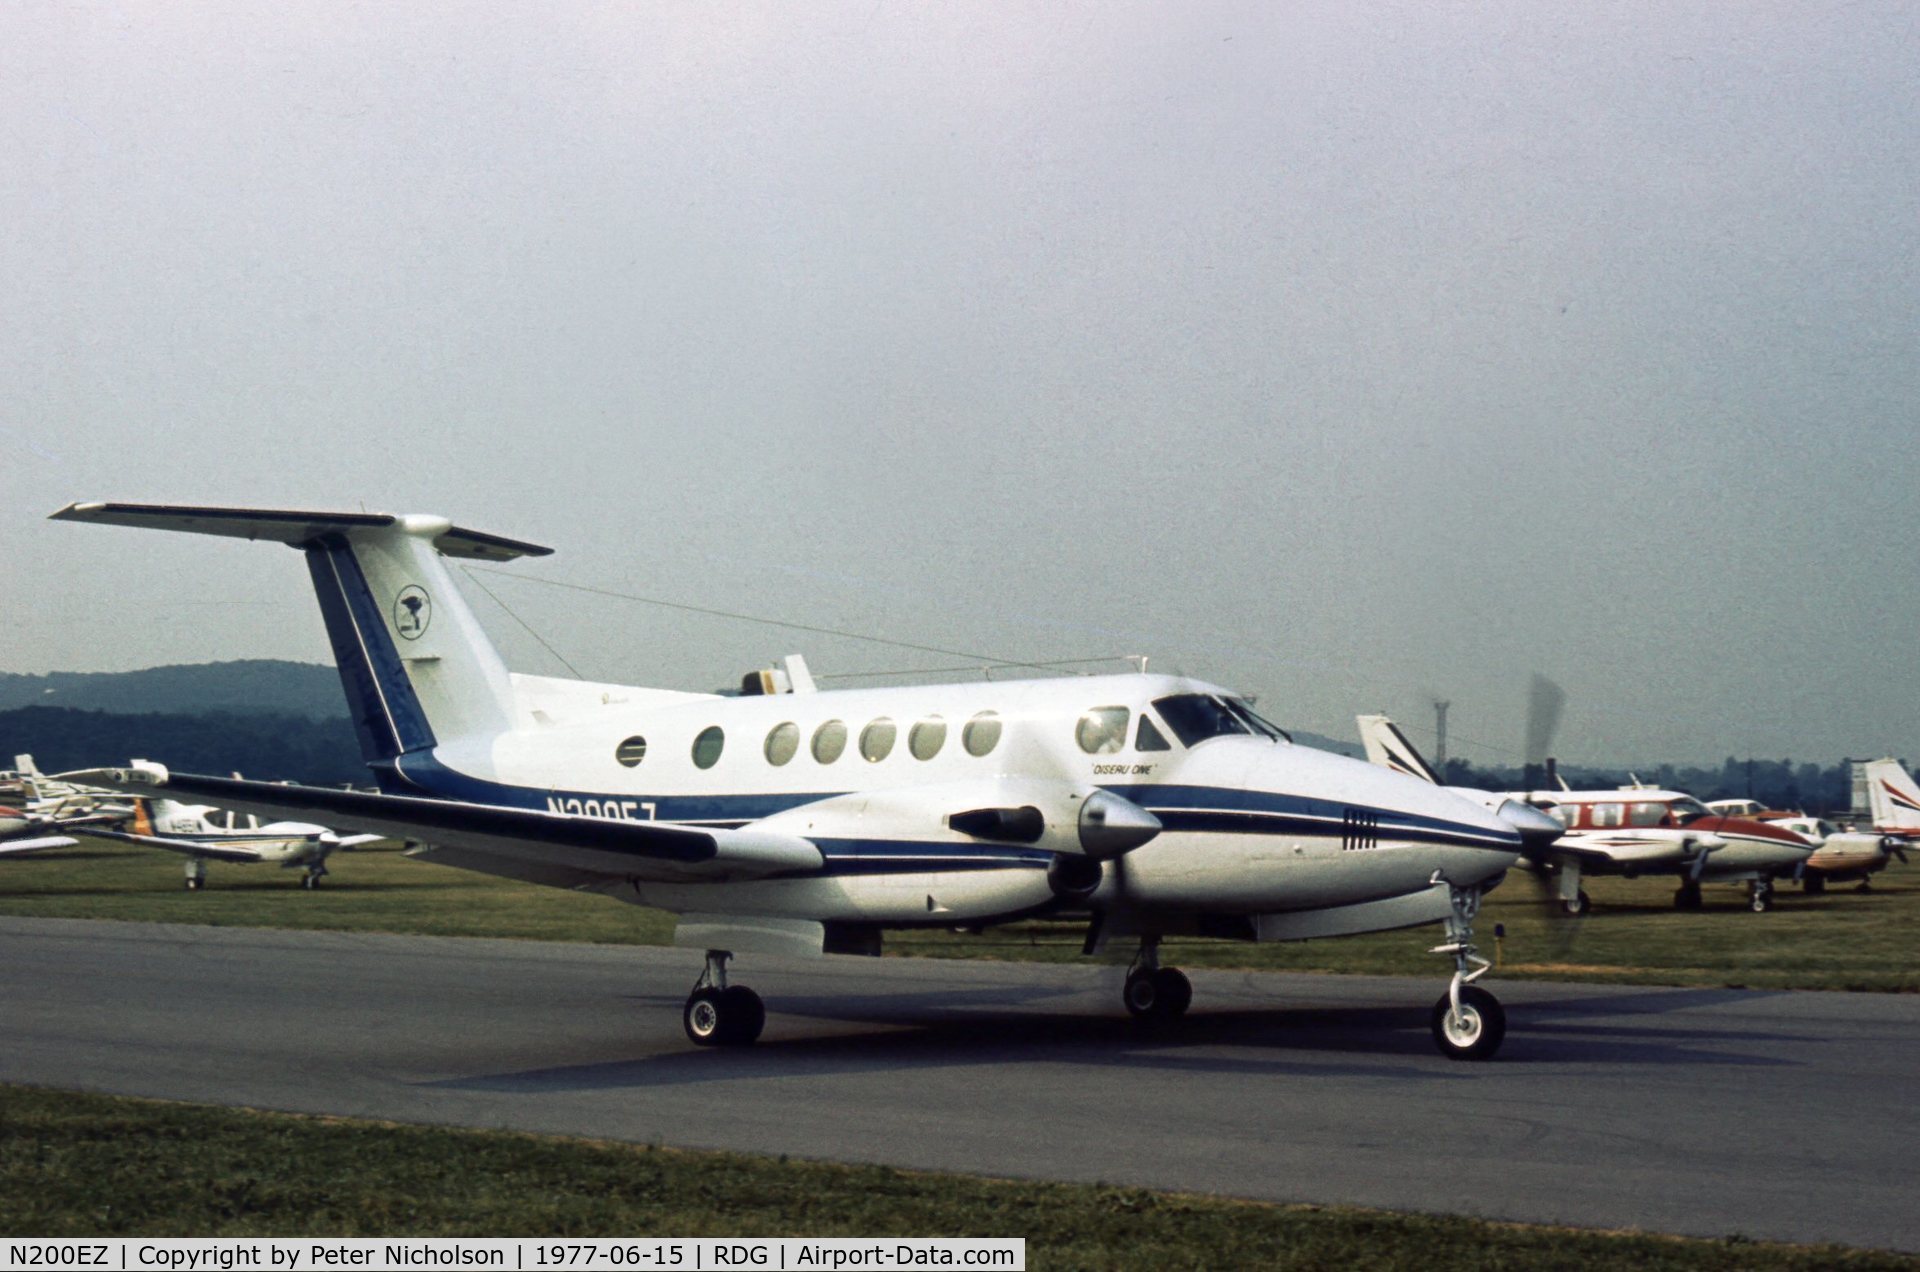 N200EZ, 1974 Beech 200 Super King Air C/N BB-9, Aptly named Oiseau One as this Super King Air, arriving at the 1977 Reading Airshow, was owned by Oiseau One Inc of Chicago.